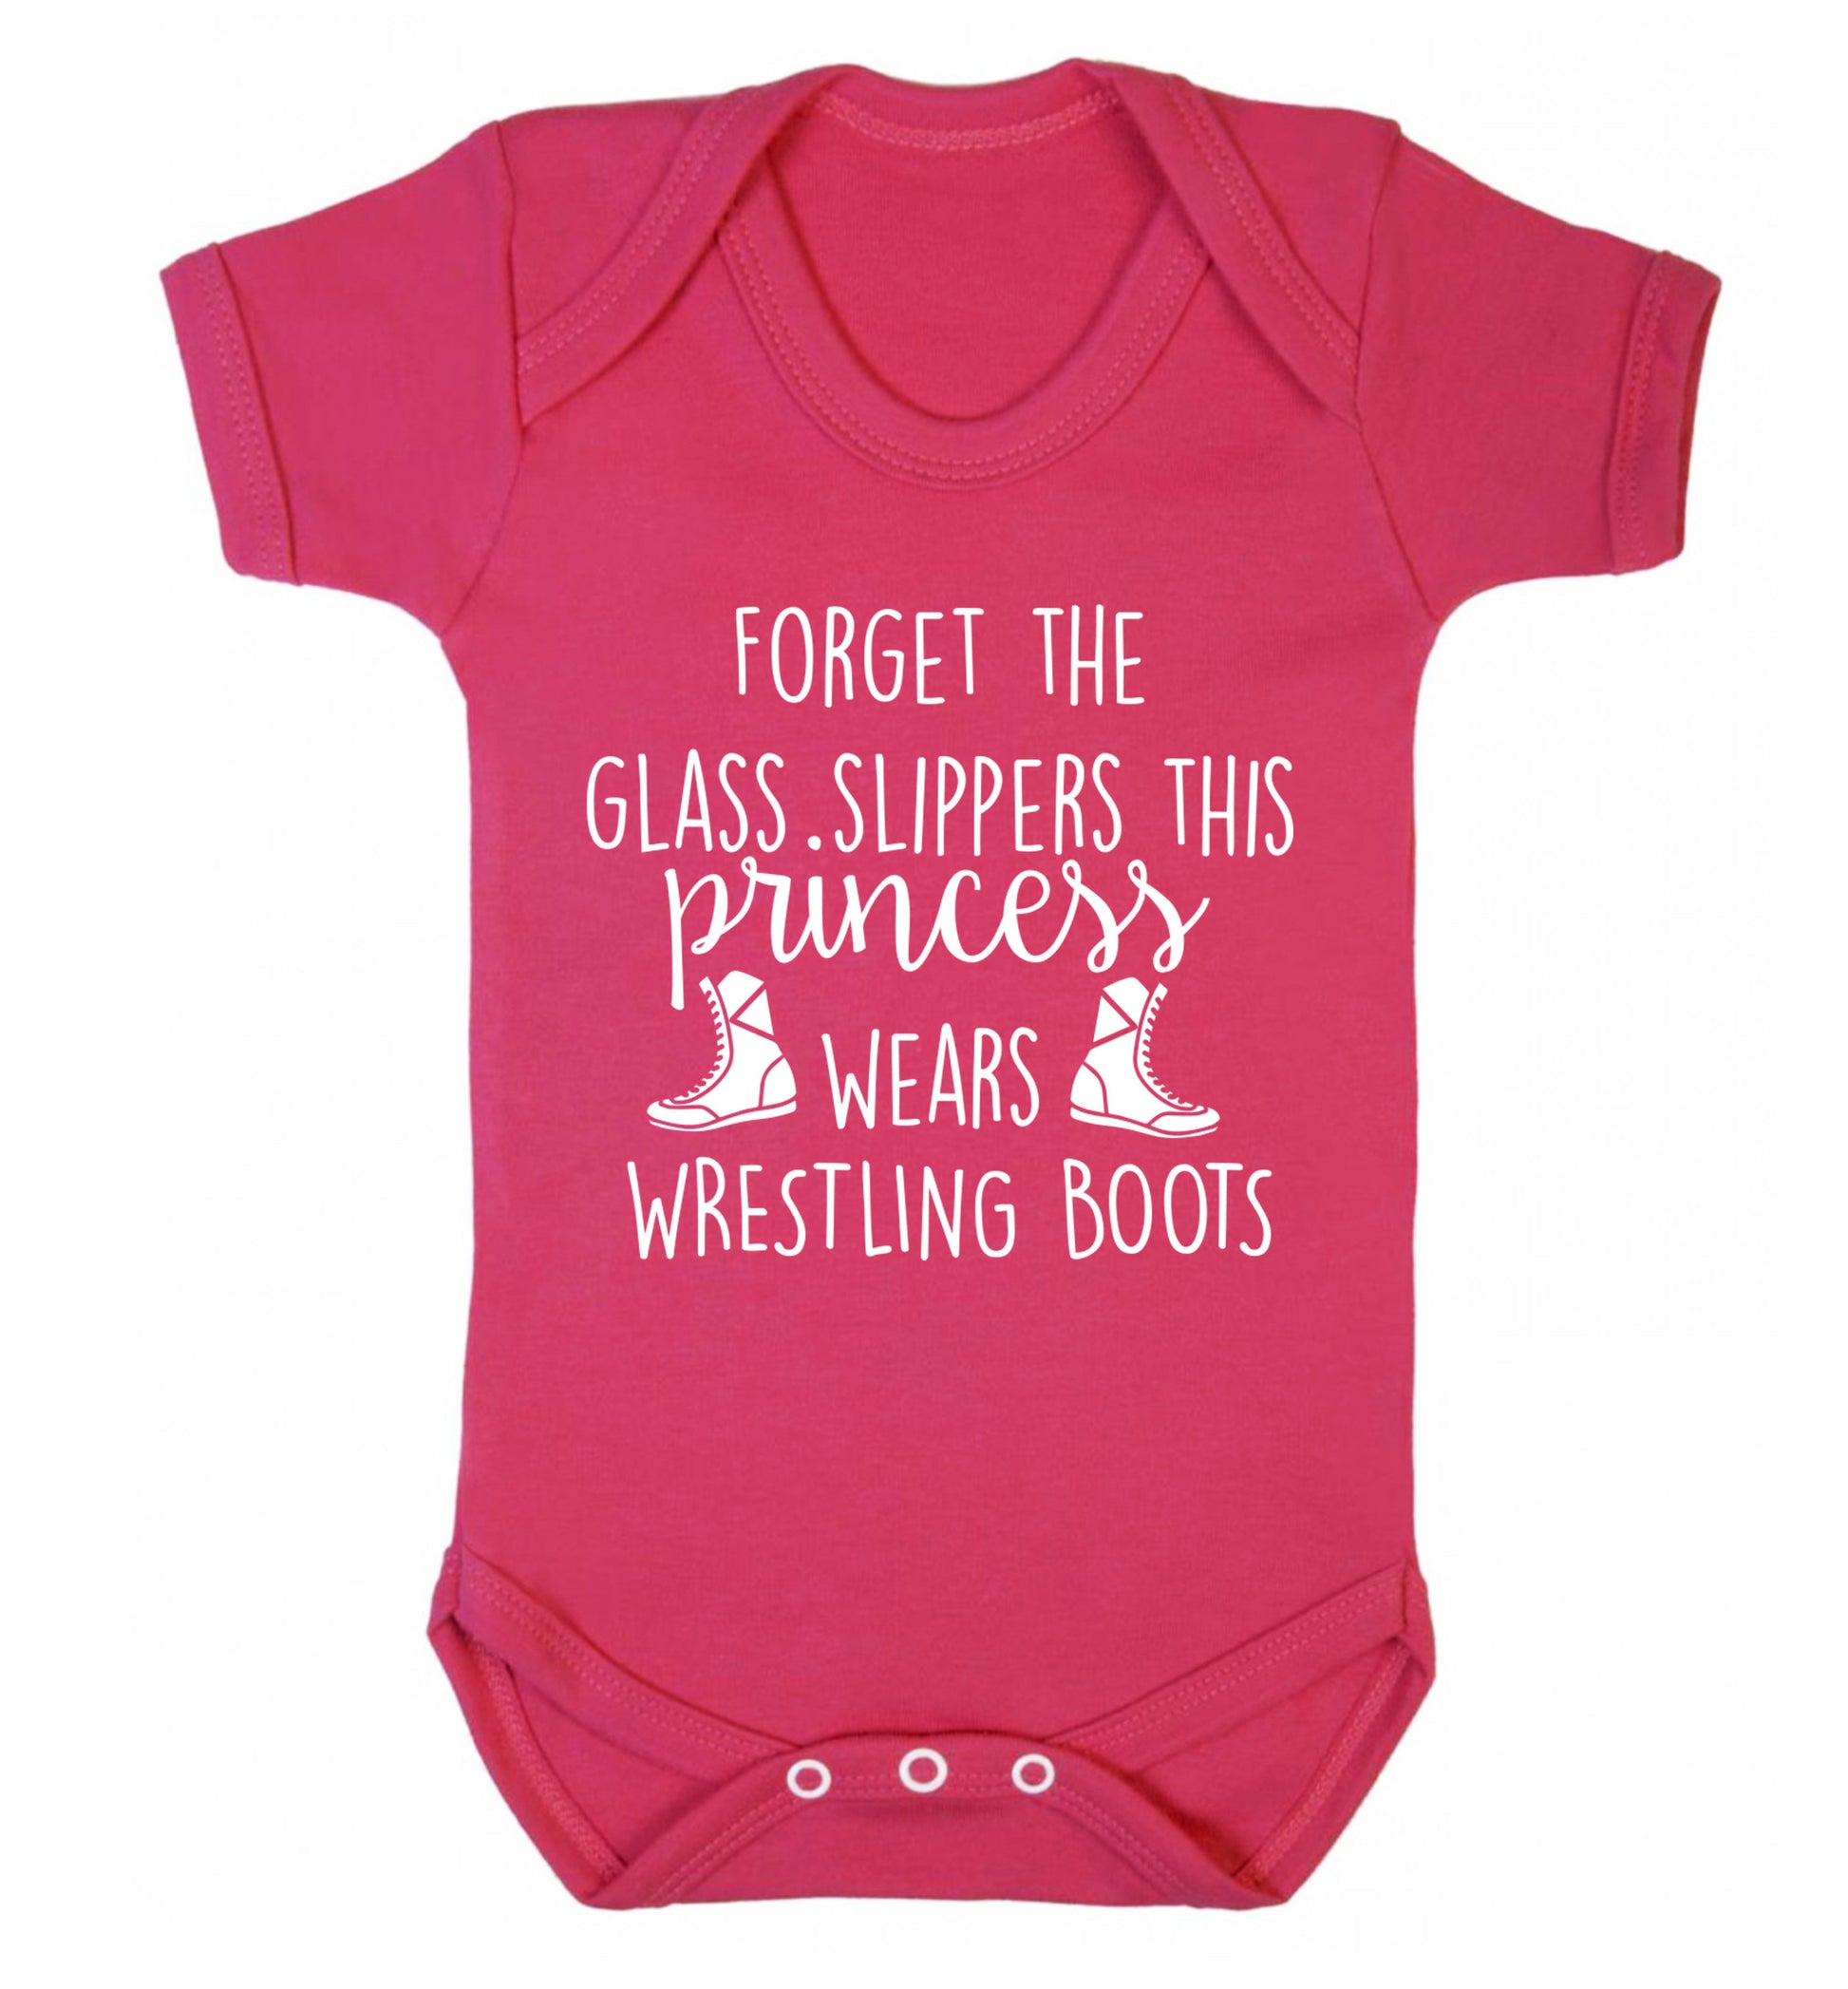 Forget the glass slippers this princess wears wrestling boots Baby Vest dark pink 18-24 months